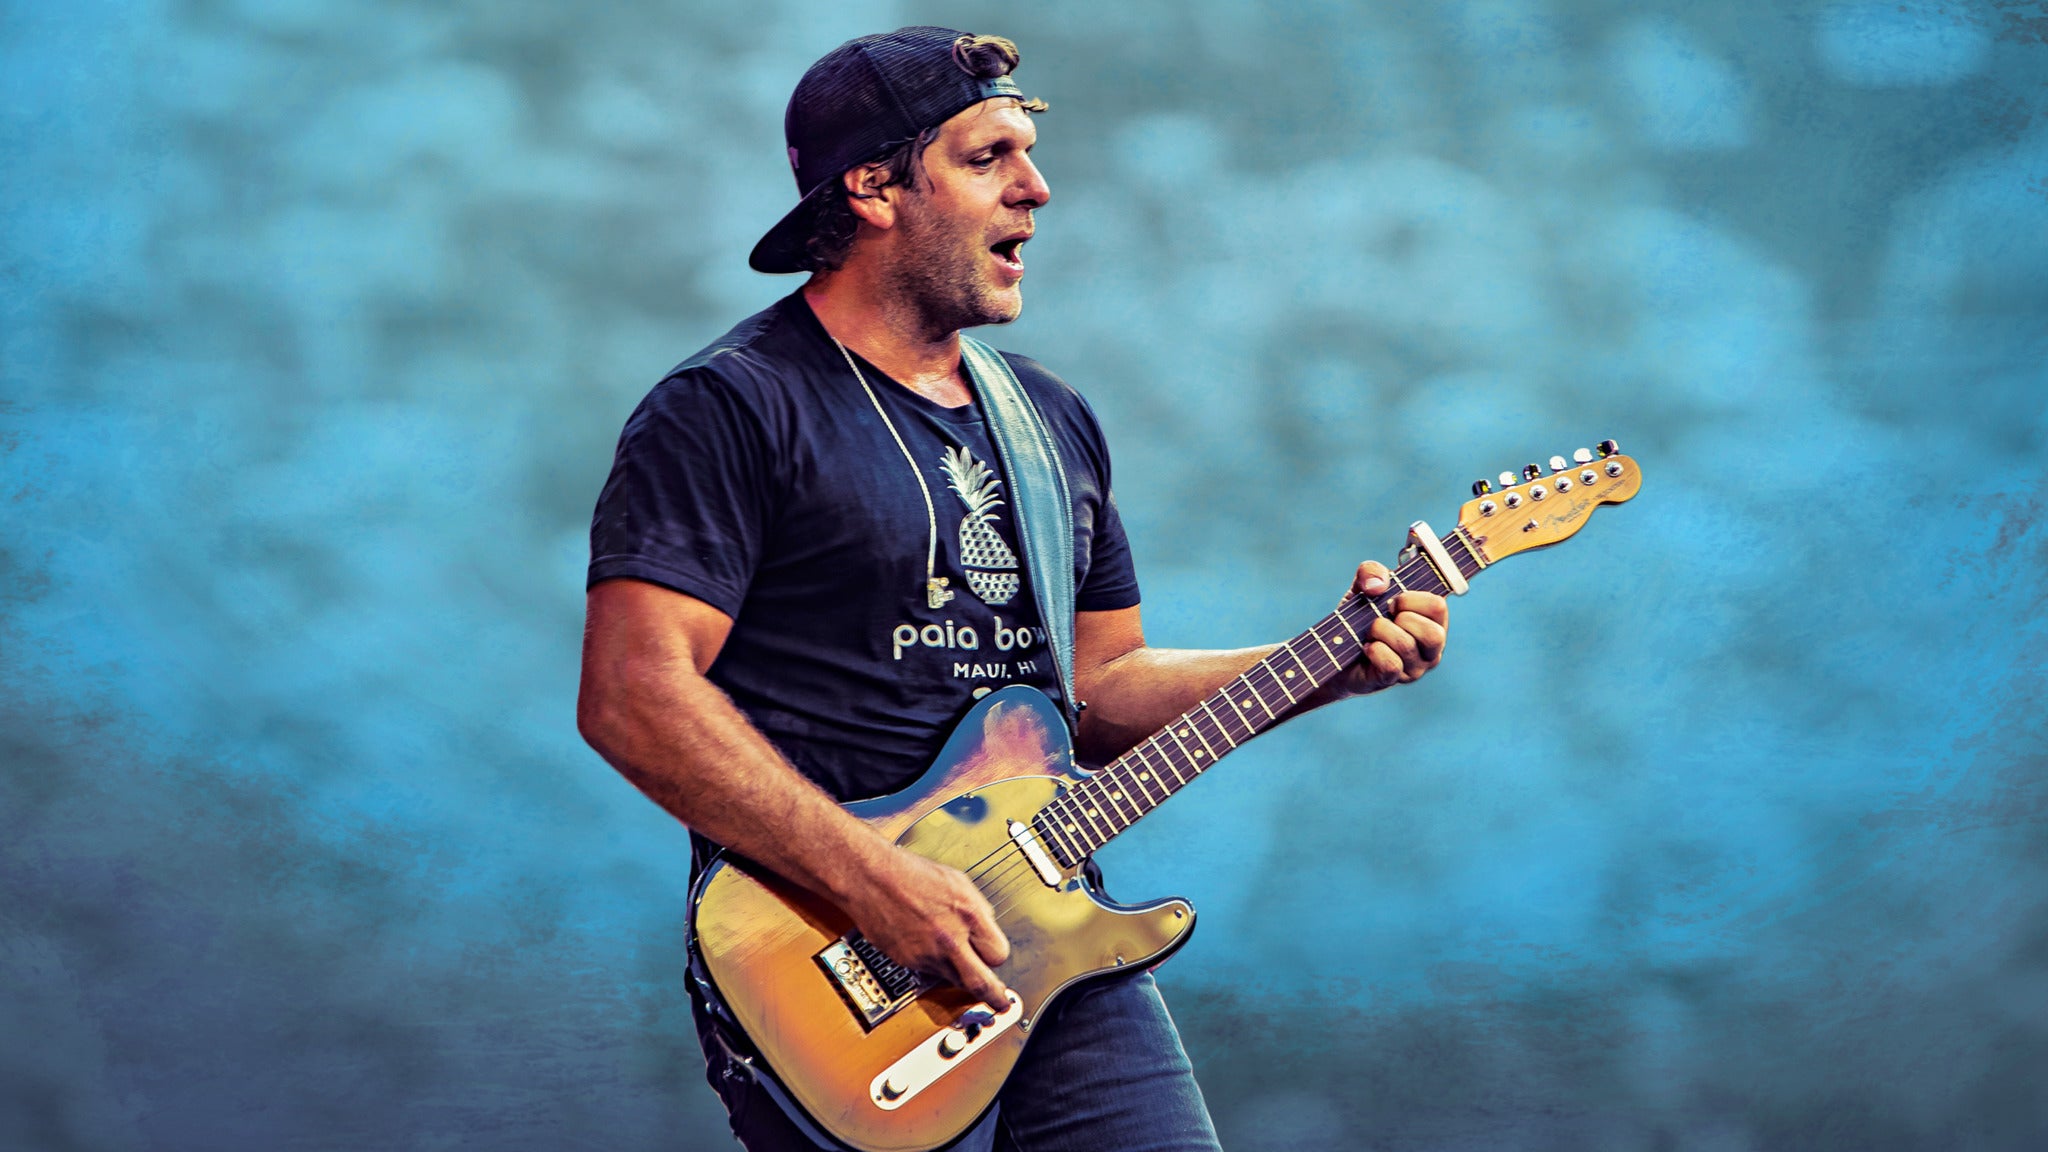 Billy Currington at The St. Augustine Amphitheatre